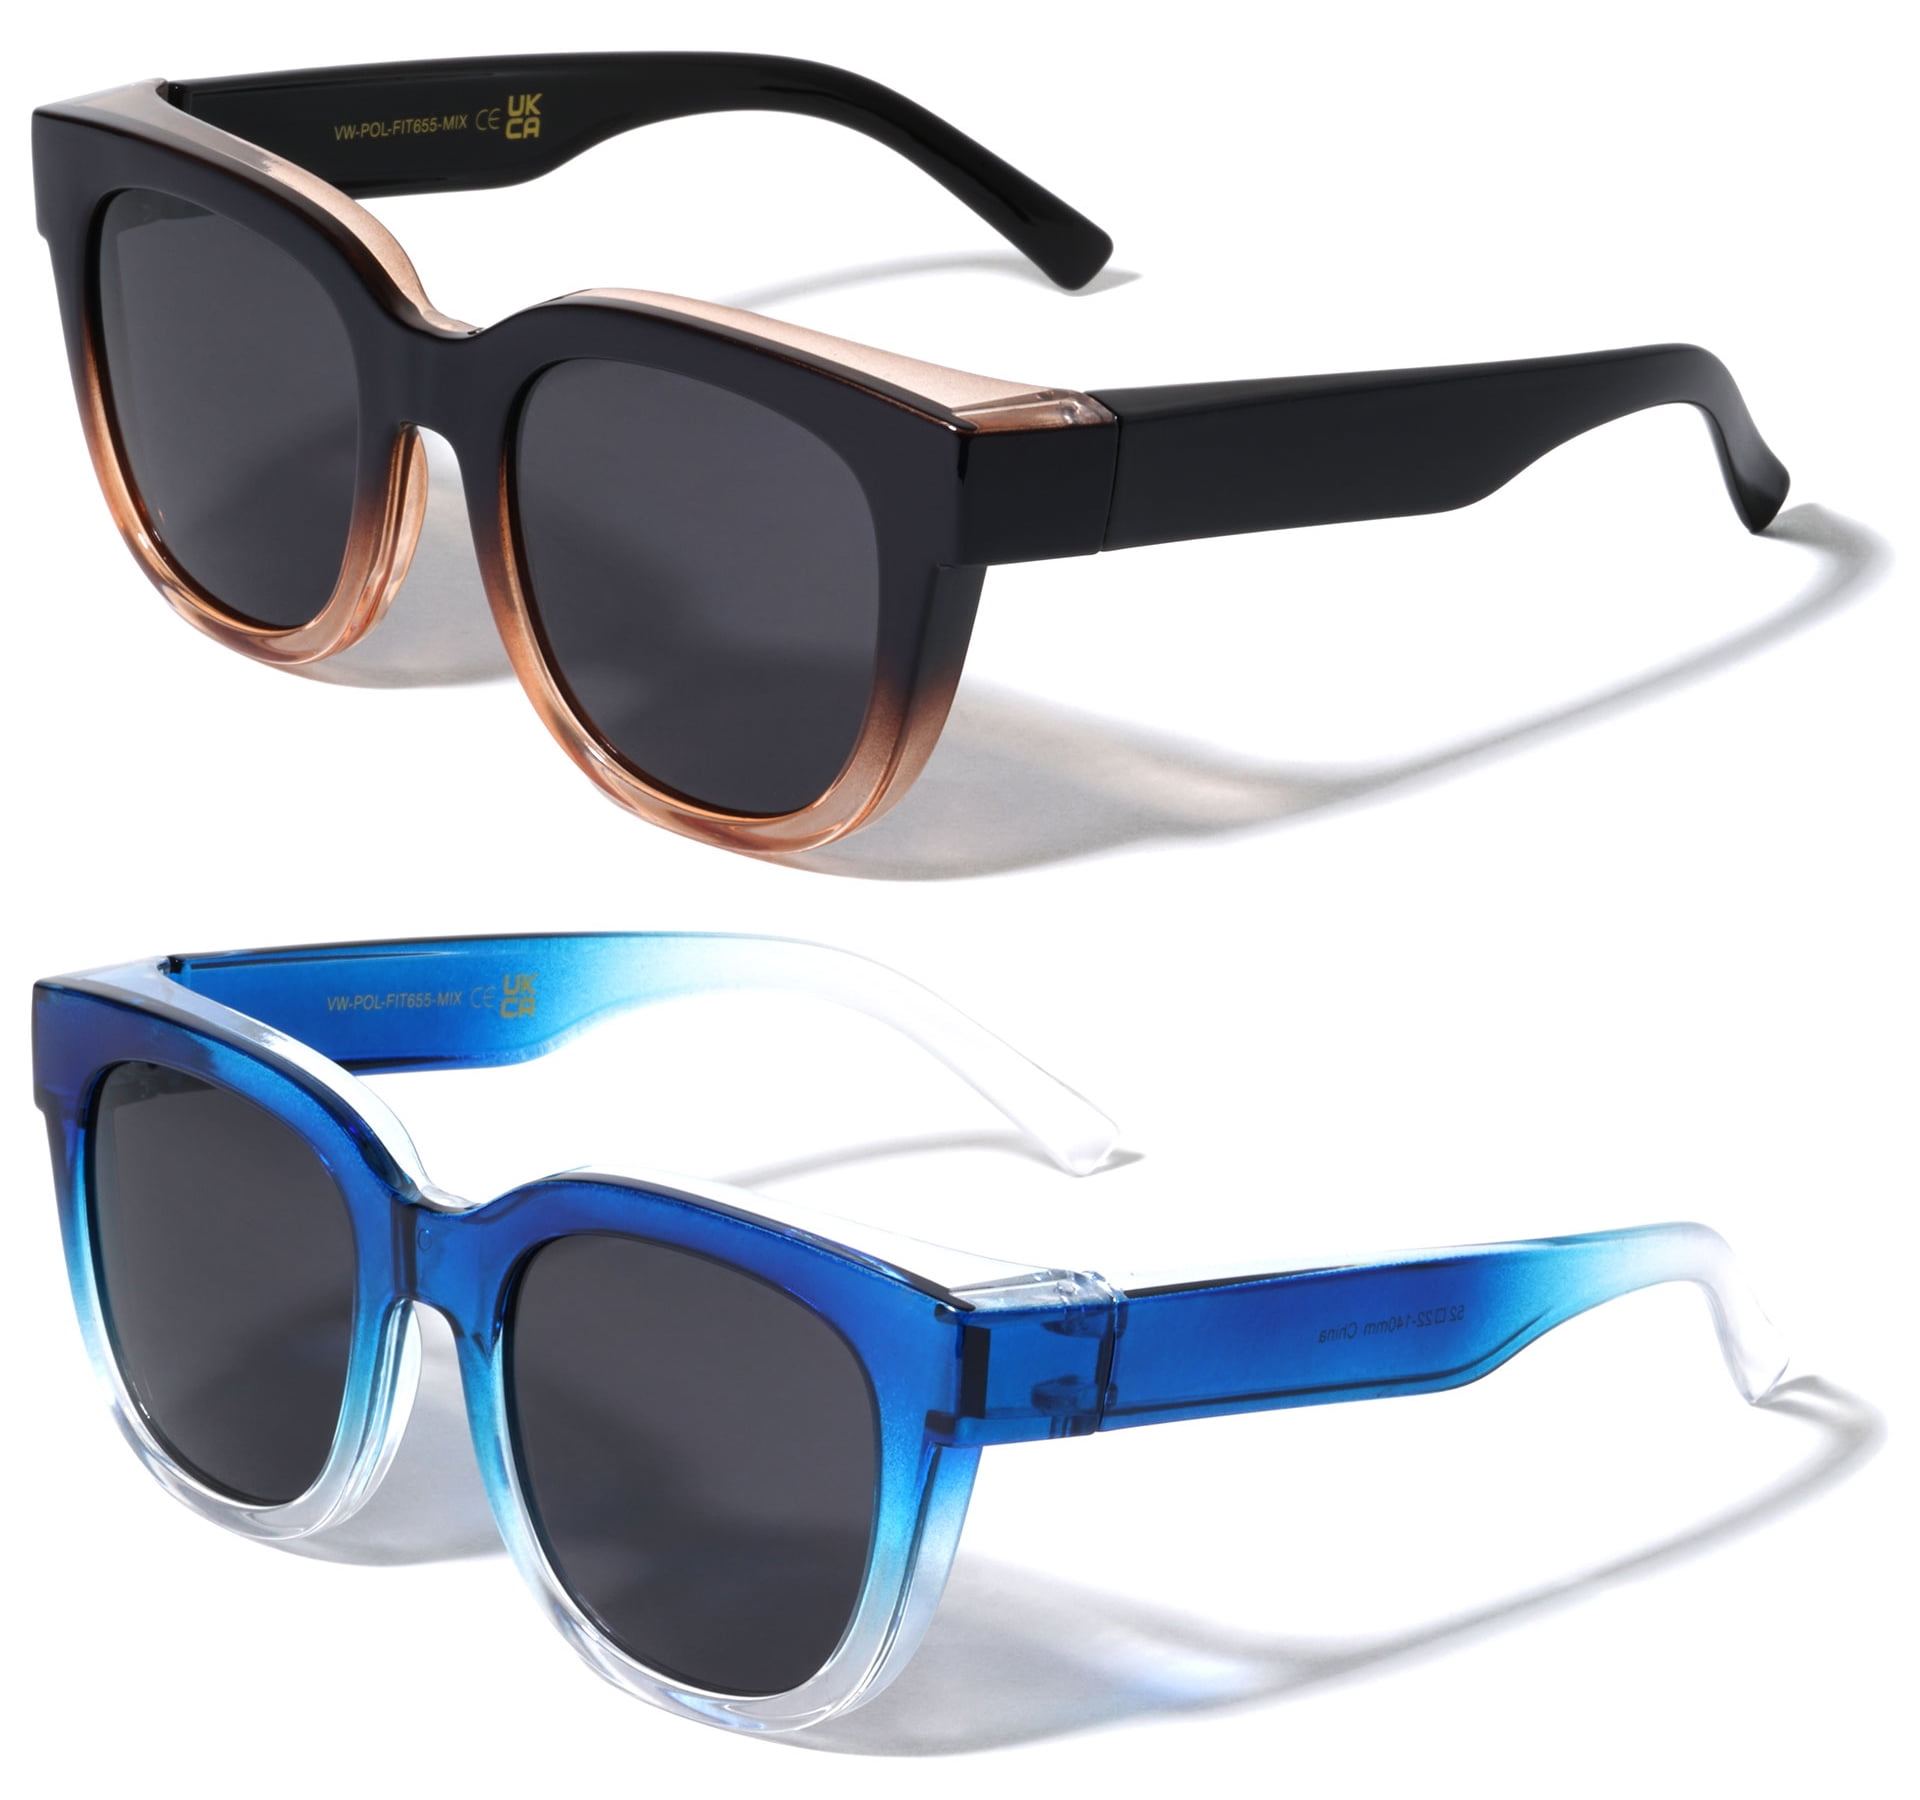  BattleVision Wrap Arounds HD Polarized Sunglasses, As Seen On TV,  Fits Over Your Prescription Eyeglasses and Reading, See Clearer,  Anti-Glare, Protects Your Eyes by Blocking Blue & UV Rays, Unisex 